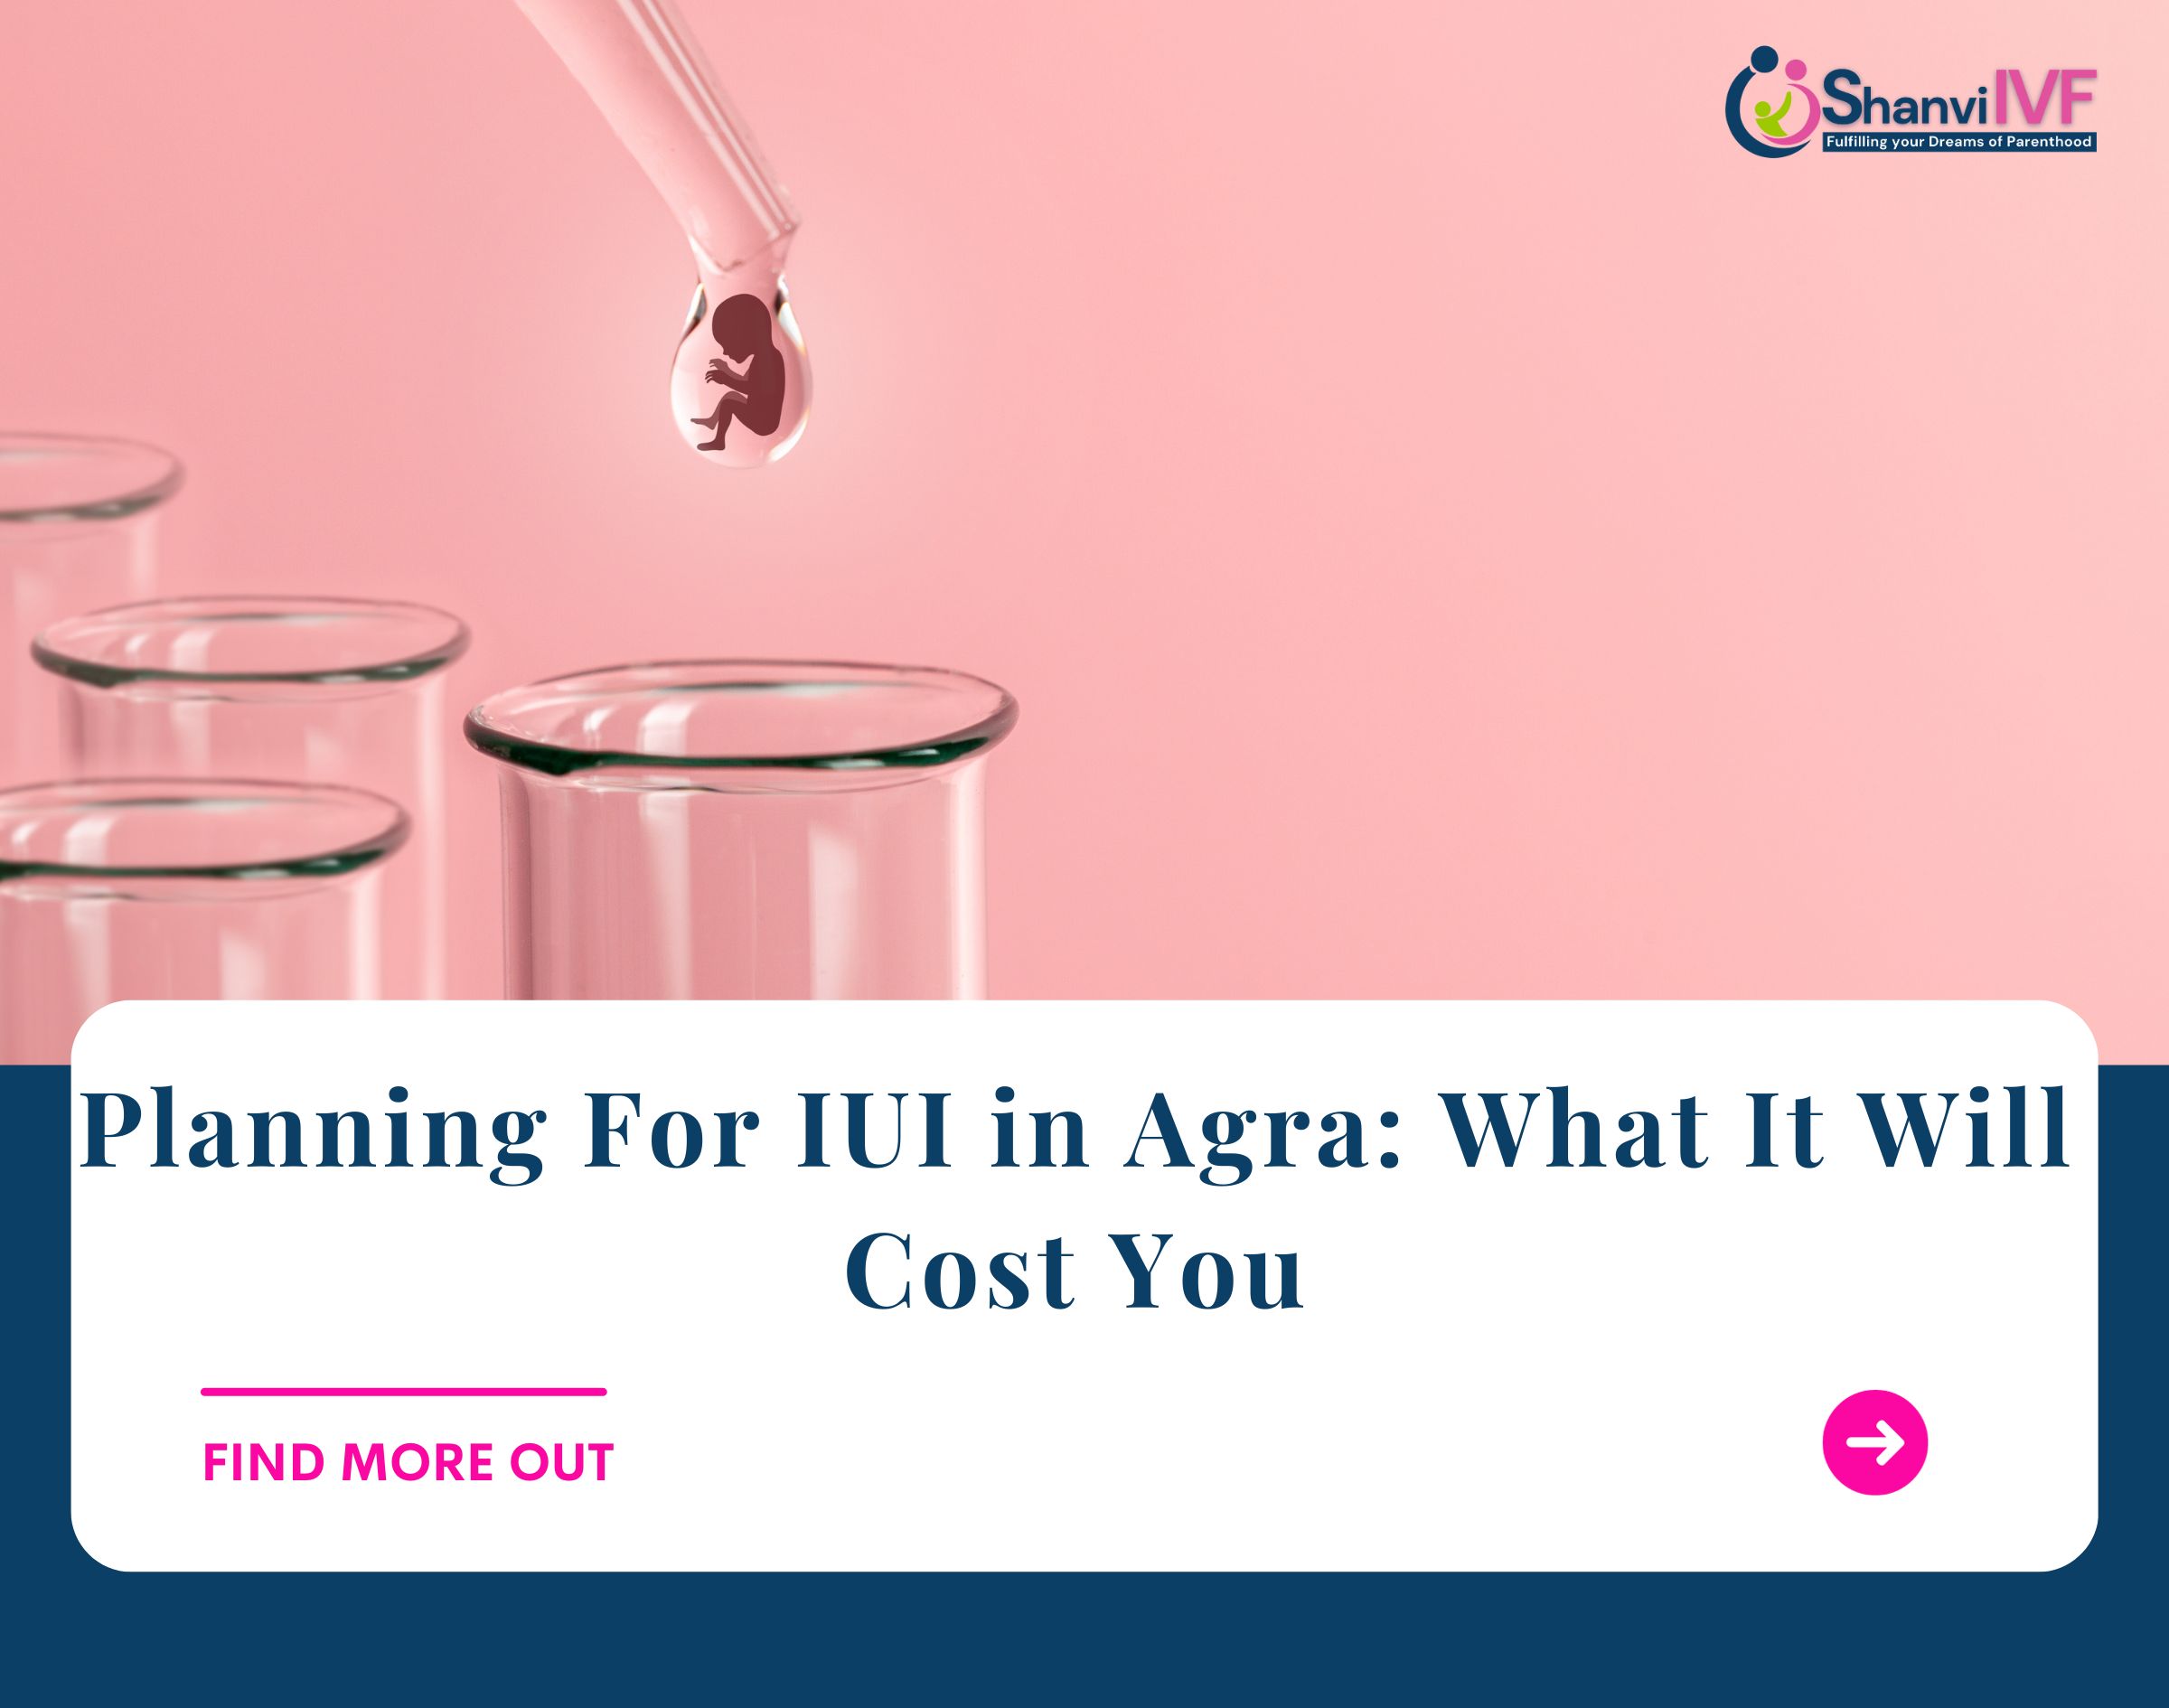 Planning For IUI in Agra: What It Will Cost You